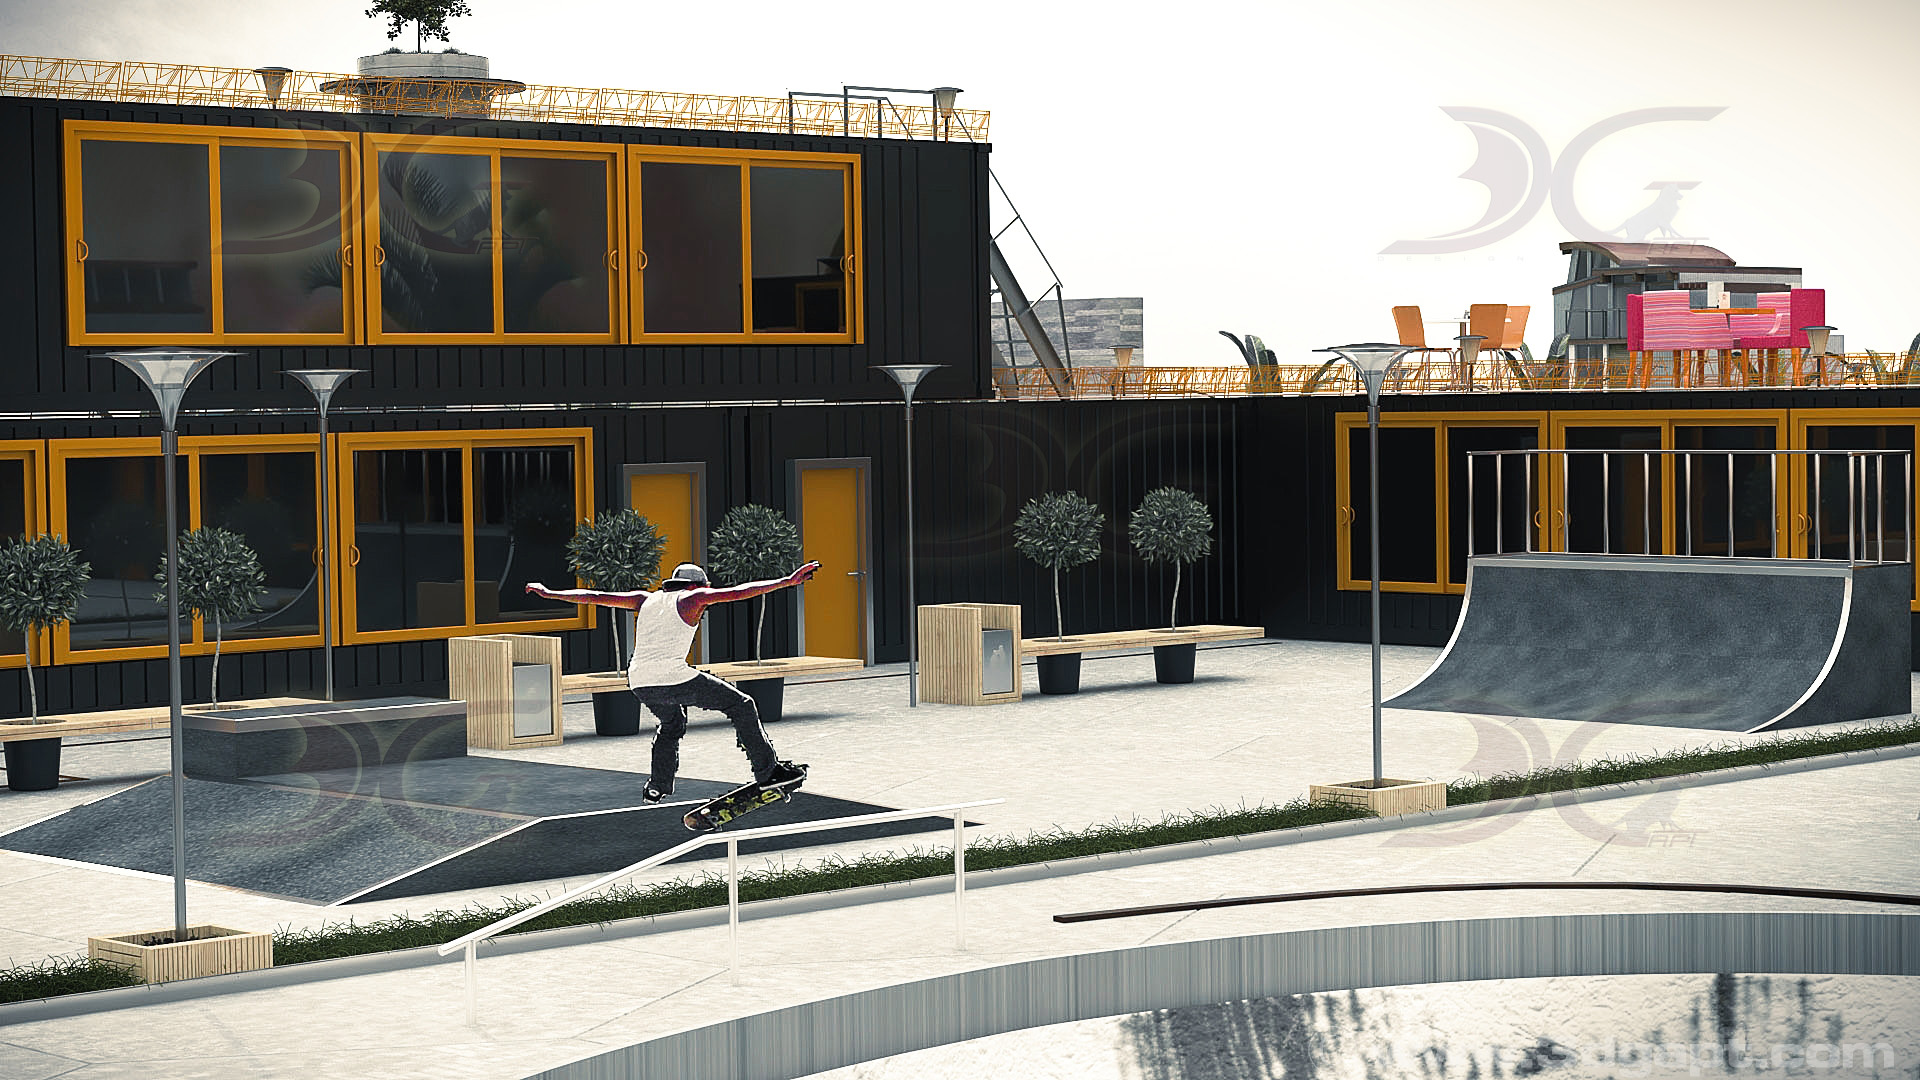 Skateboard and container office park 8